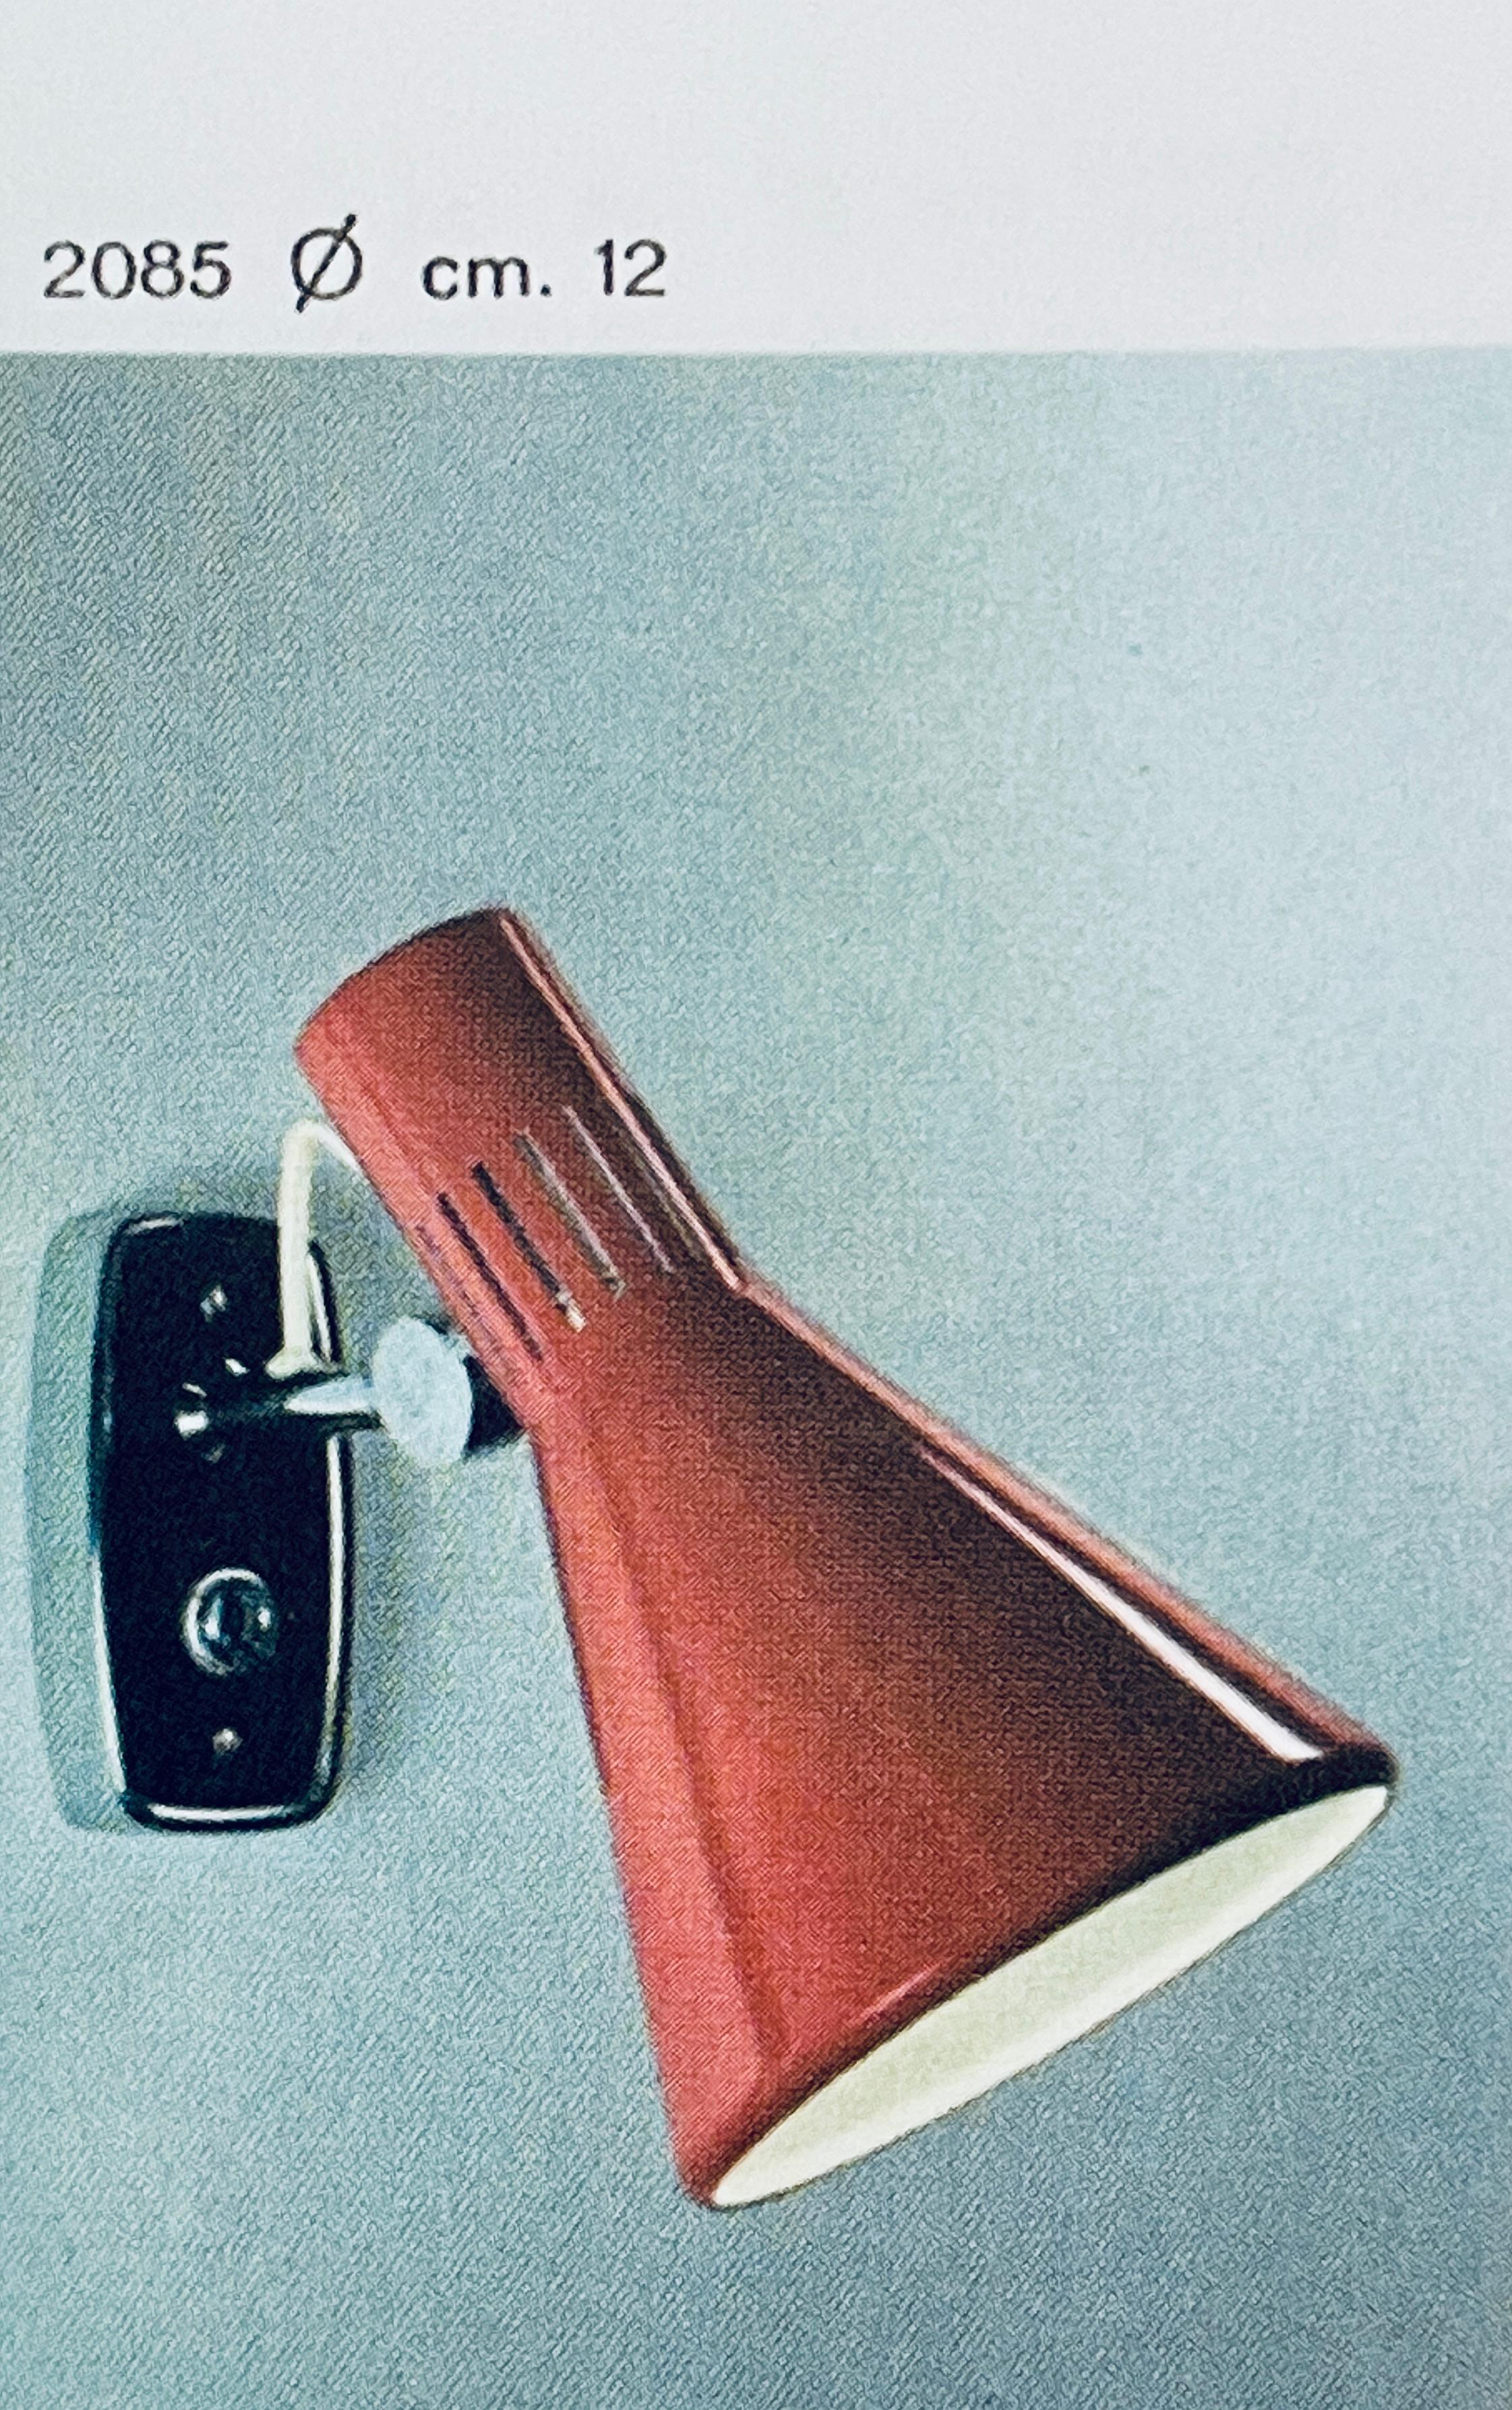 1960s Stilnovo Model #2085 articulating sconce with yellow label.
A quintessentially 1960s Italian design executed in red painted metal with modified backplate for mounting over a standard American j-box. Shade can be rotated freely on an